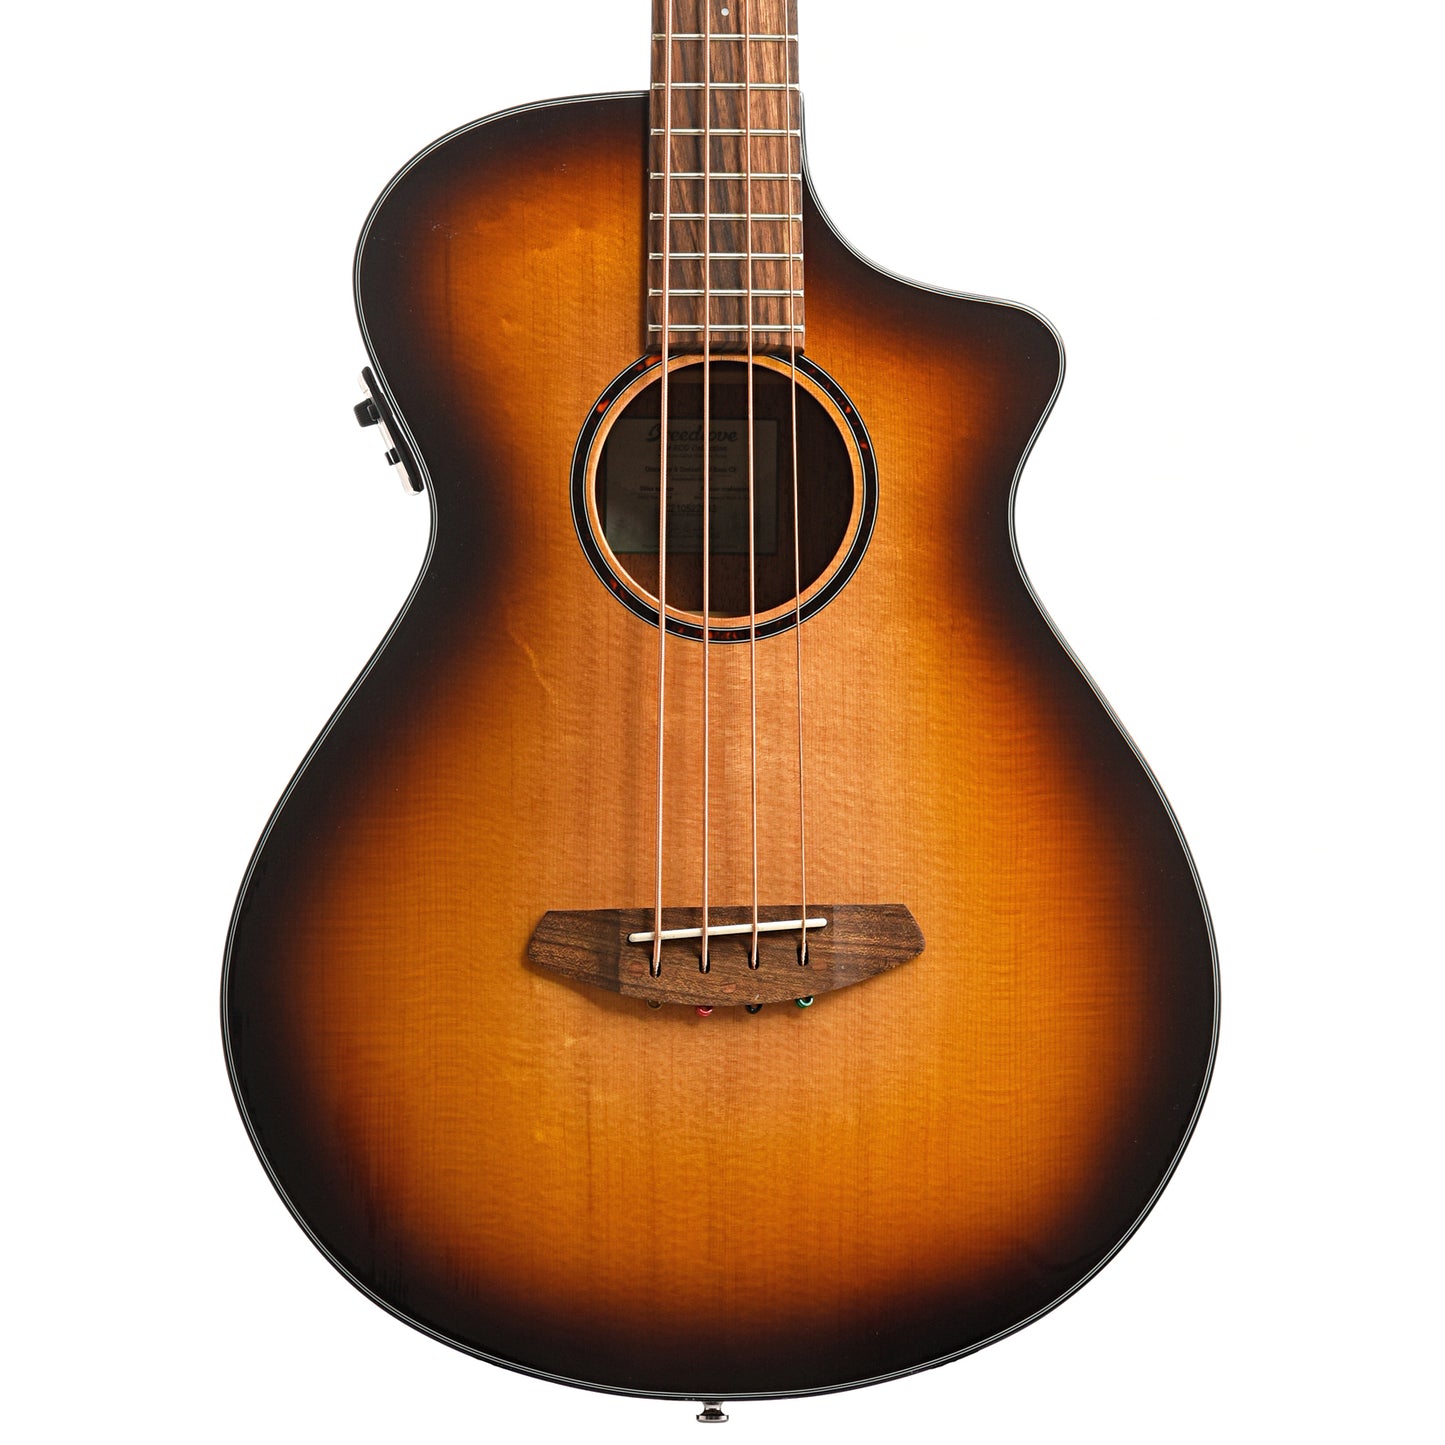 Image 2 of Breedlove Discovery S Concert Edgeburst Bass CE Sitka-African Mahogany Acoustic-Electric Bass Guitar - SKU# DSCN44BCESSAM : Product Type Flat-top Guitars : Elderly Instruments